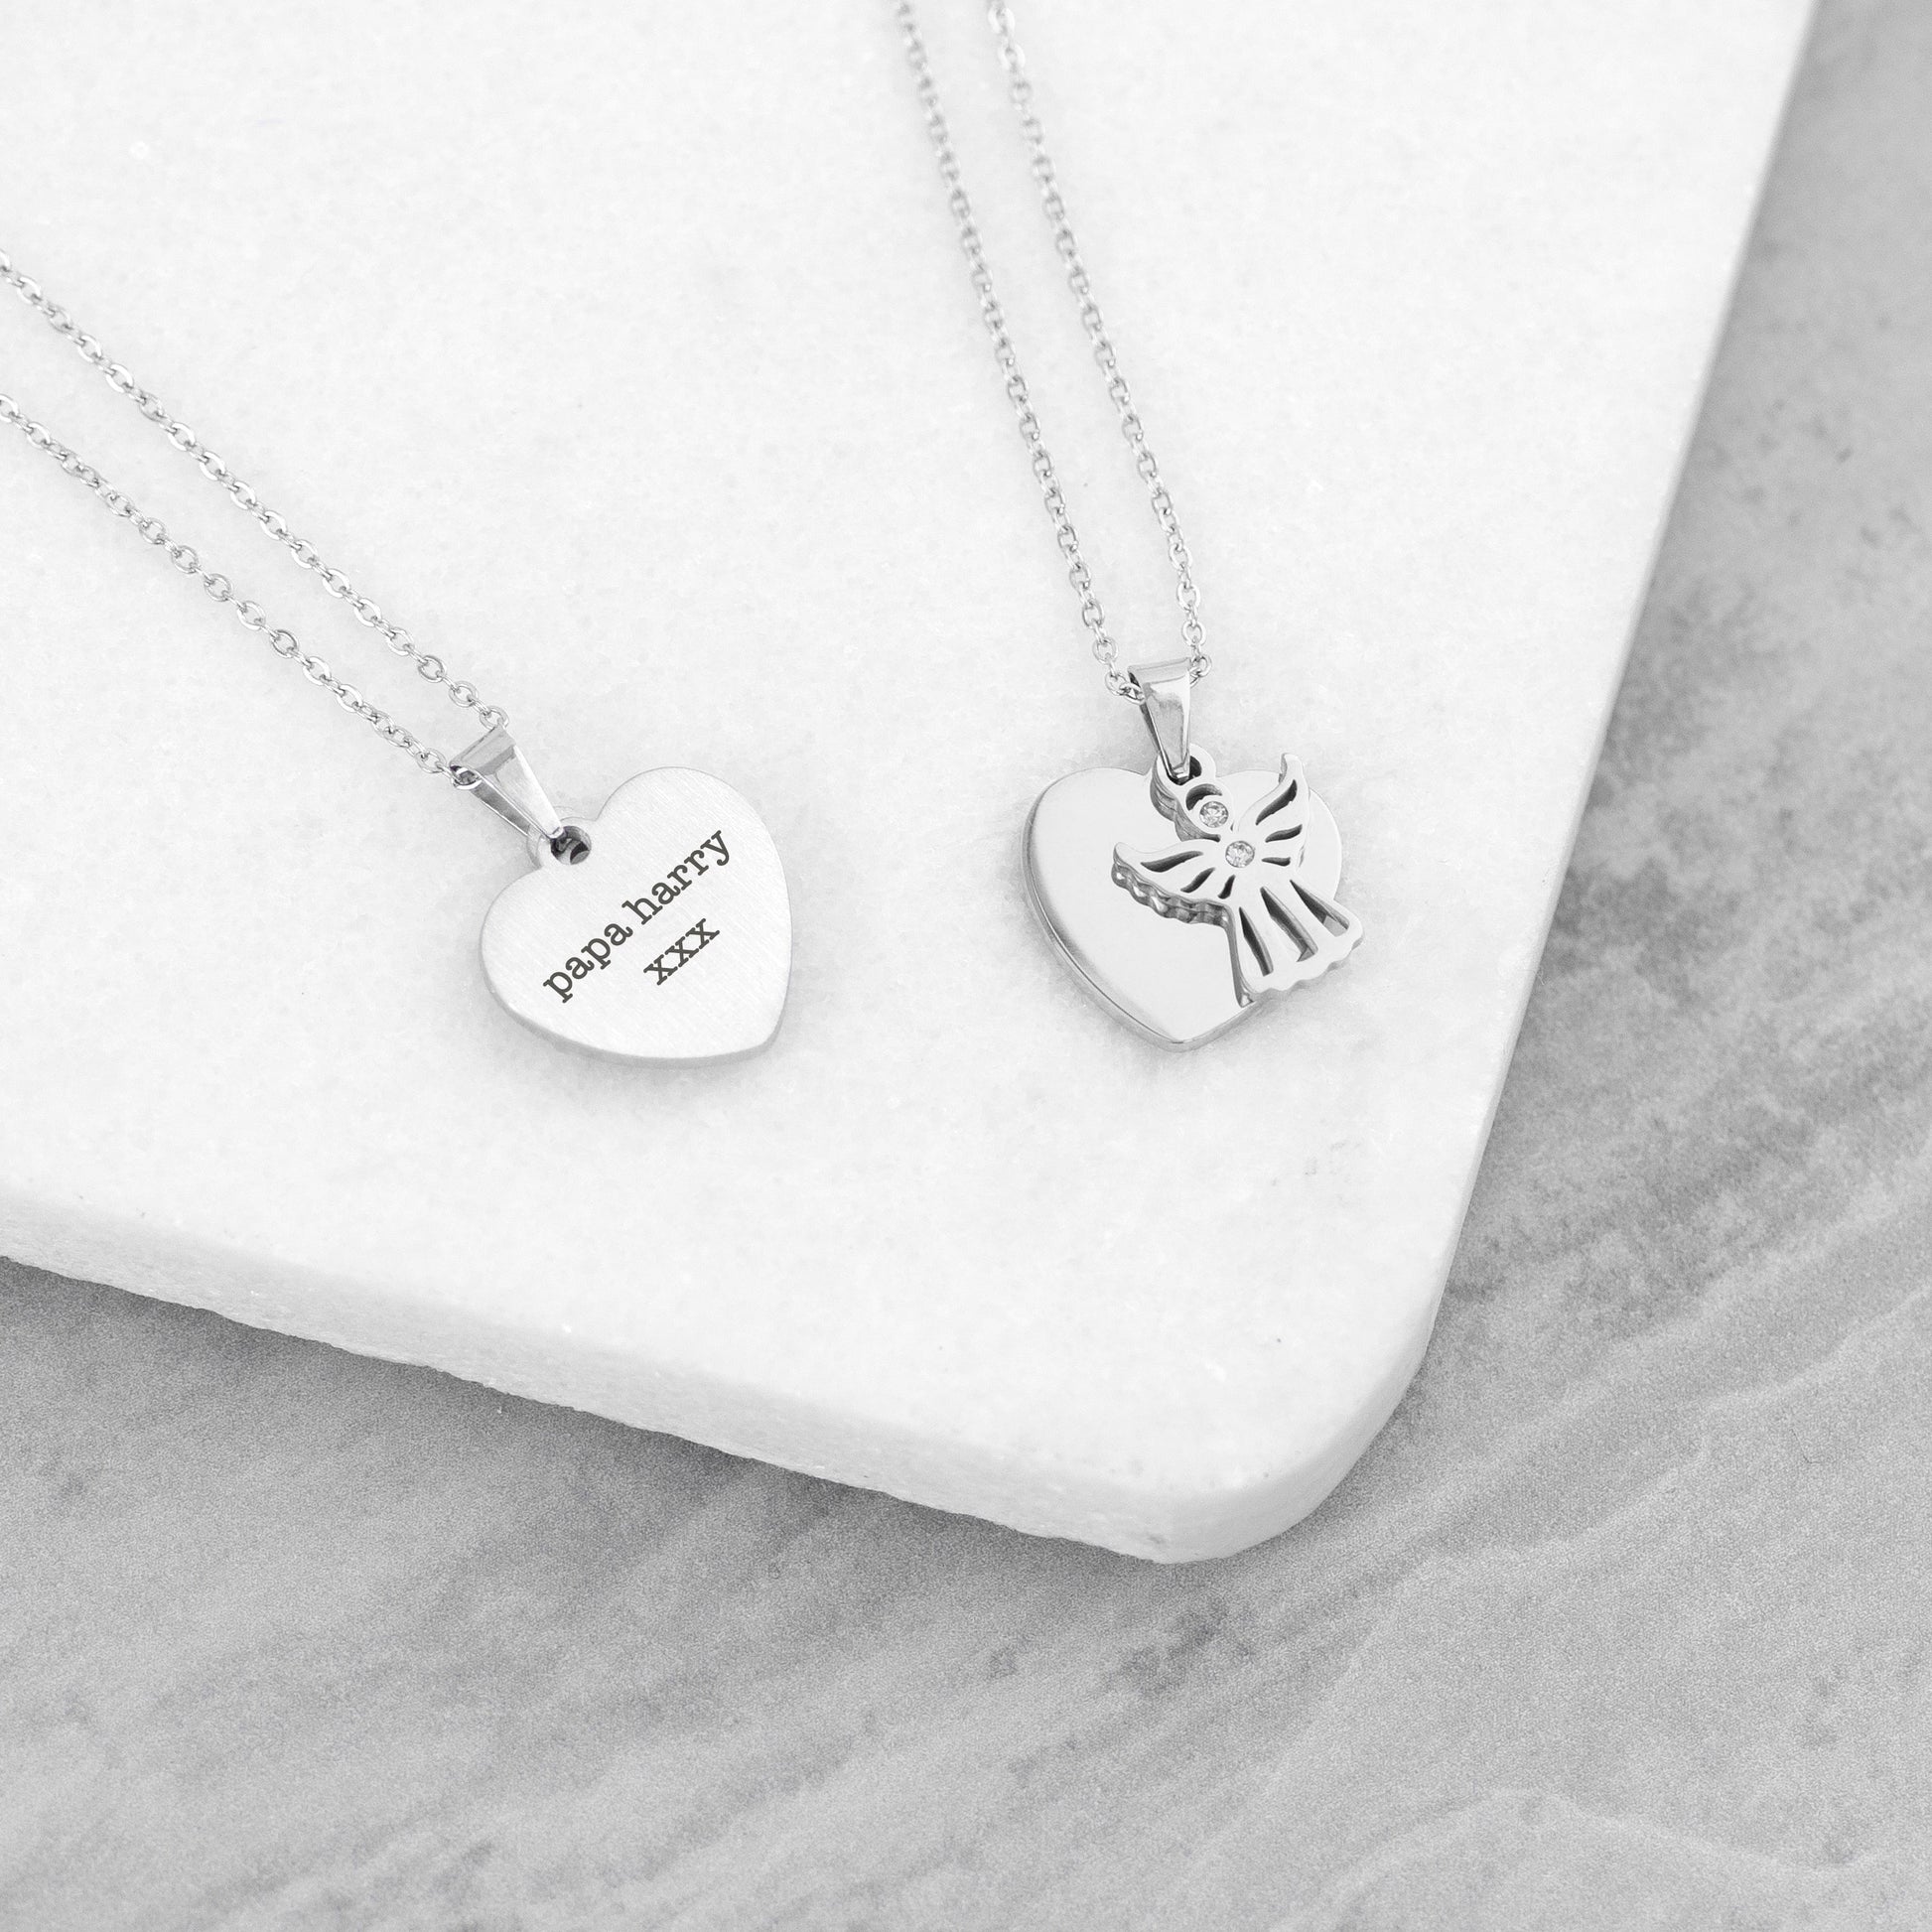 Personalized Necklaces - Personalized Guardian Angel Necklace 